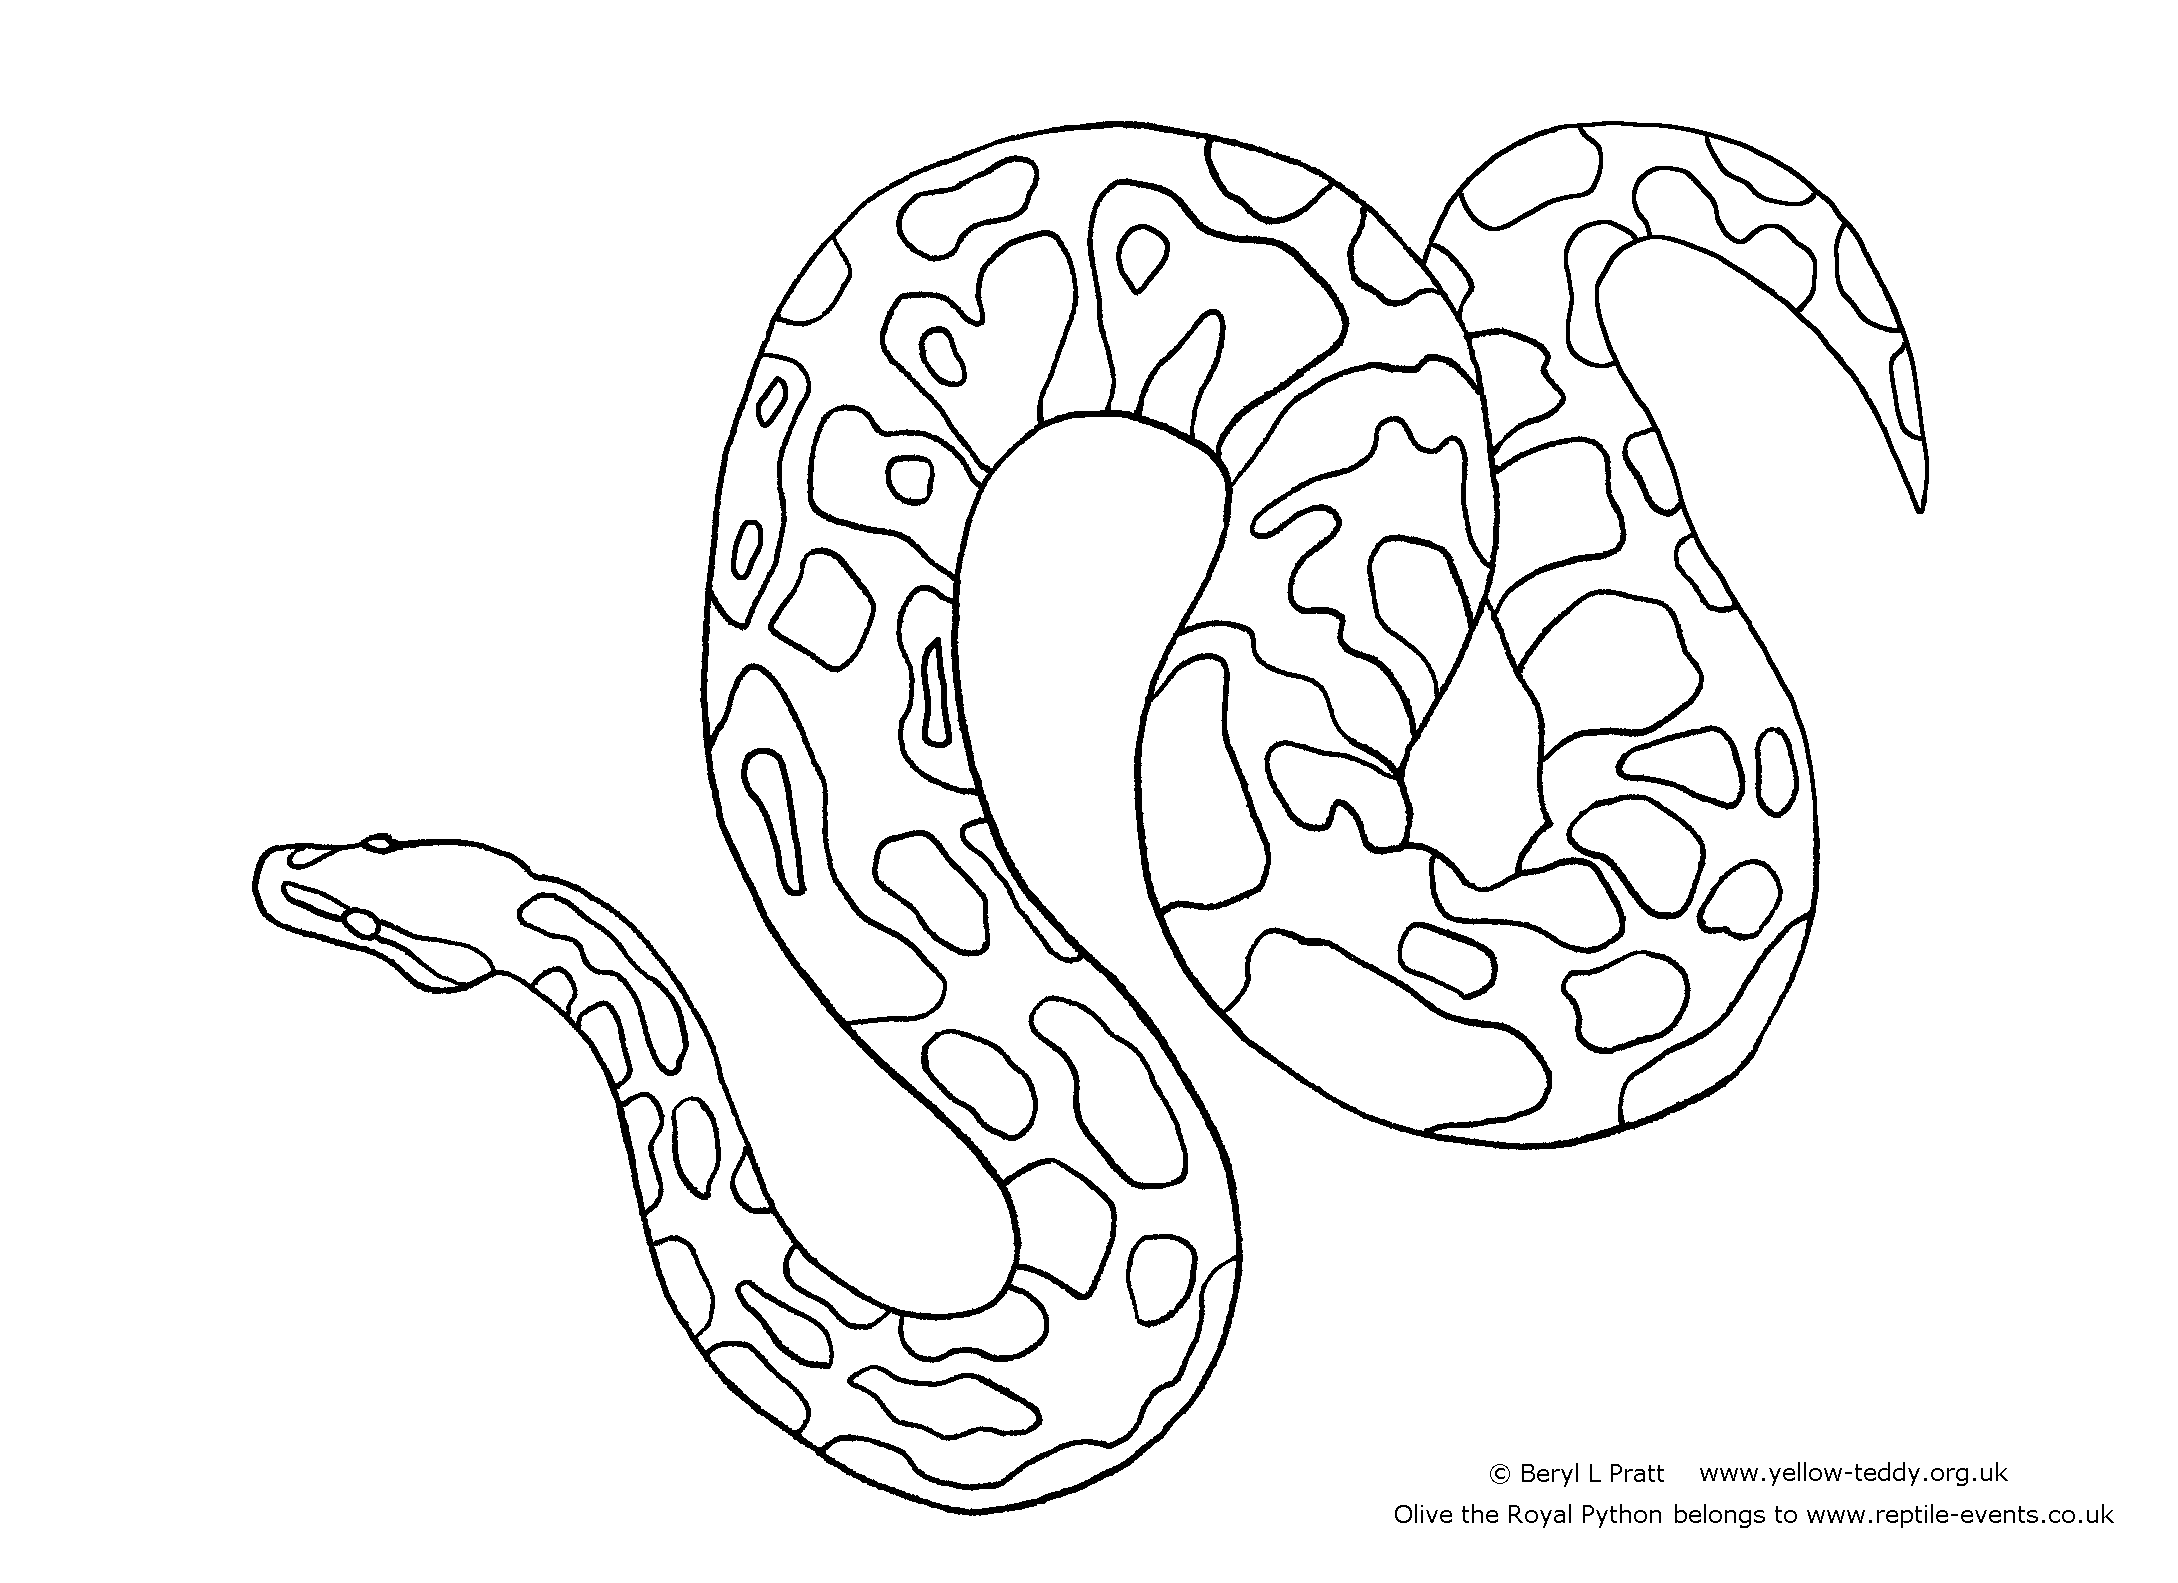 Line drawing of Olive the Royal Python